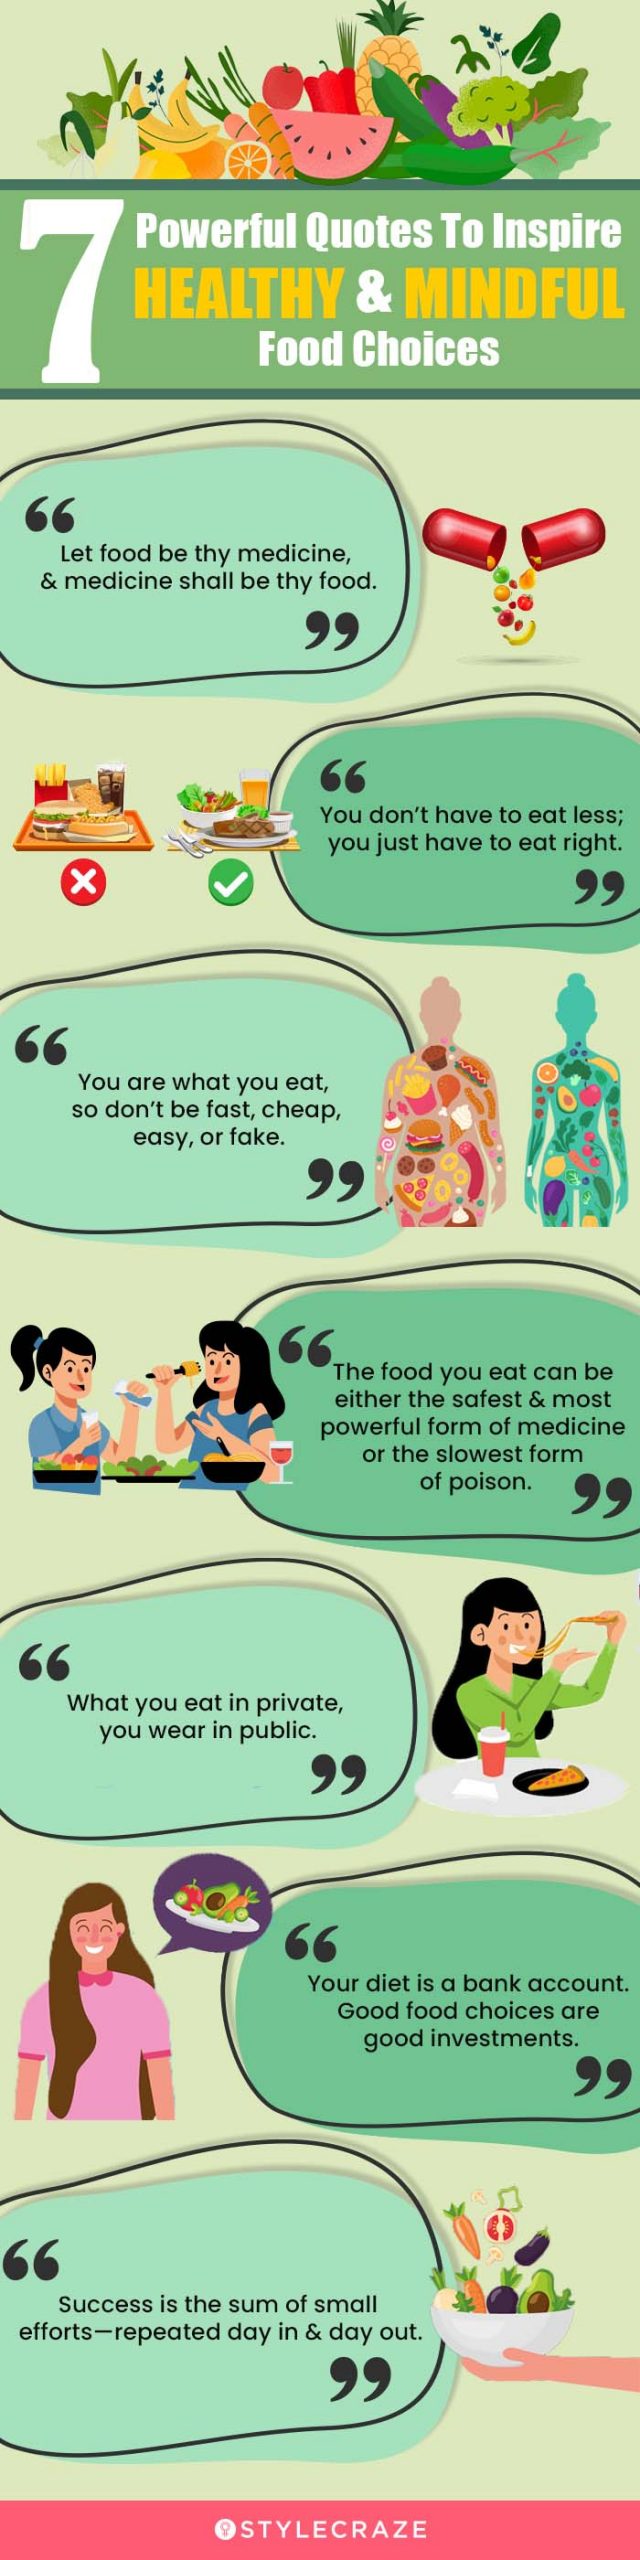 Top 24 Healthy Food Quotes To Inspire You  